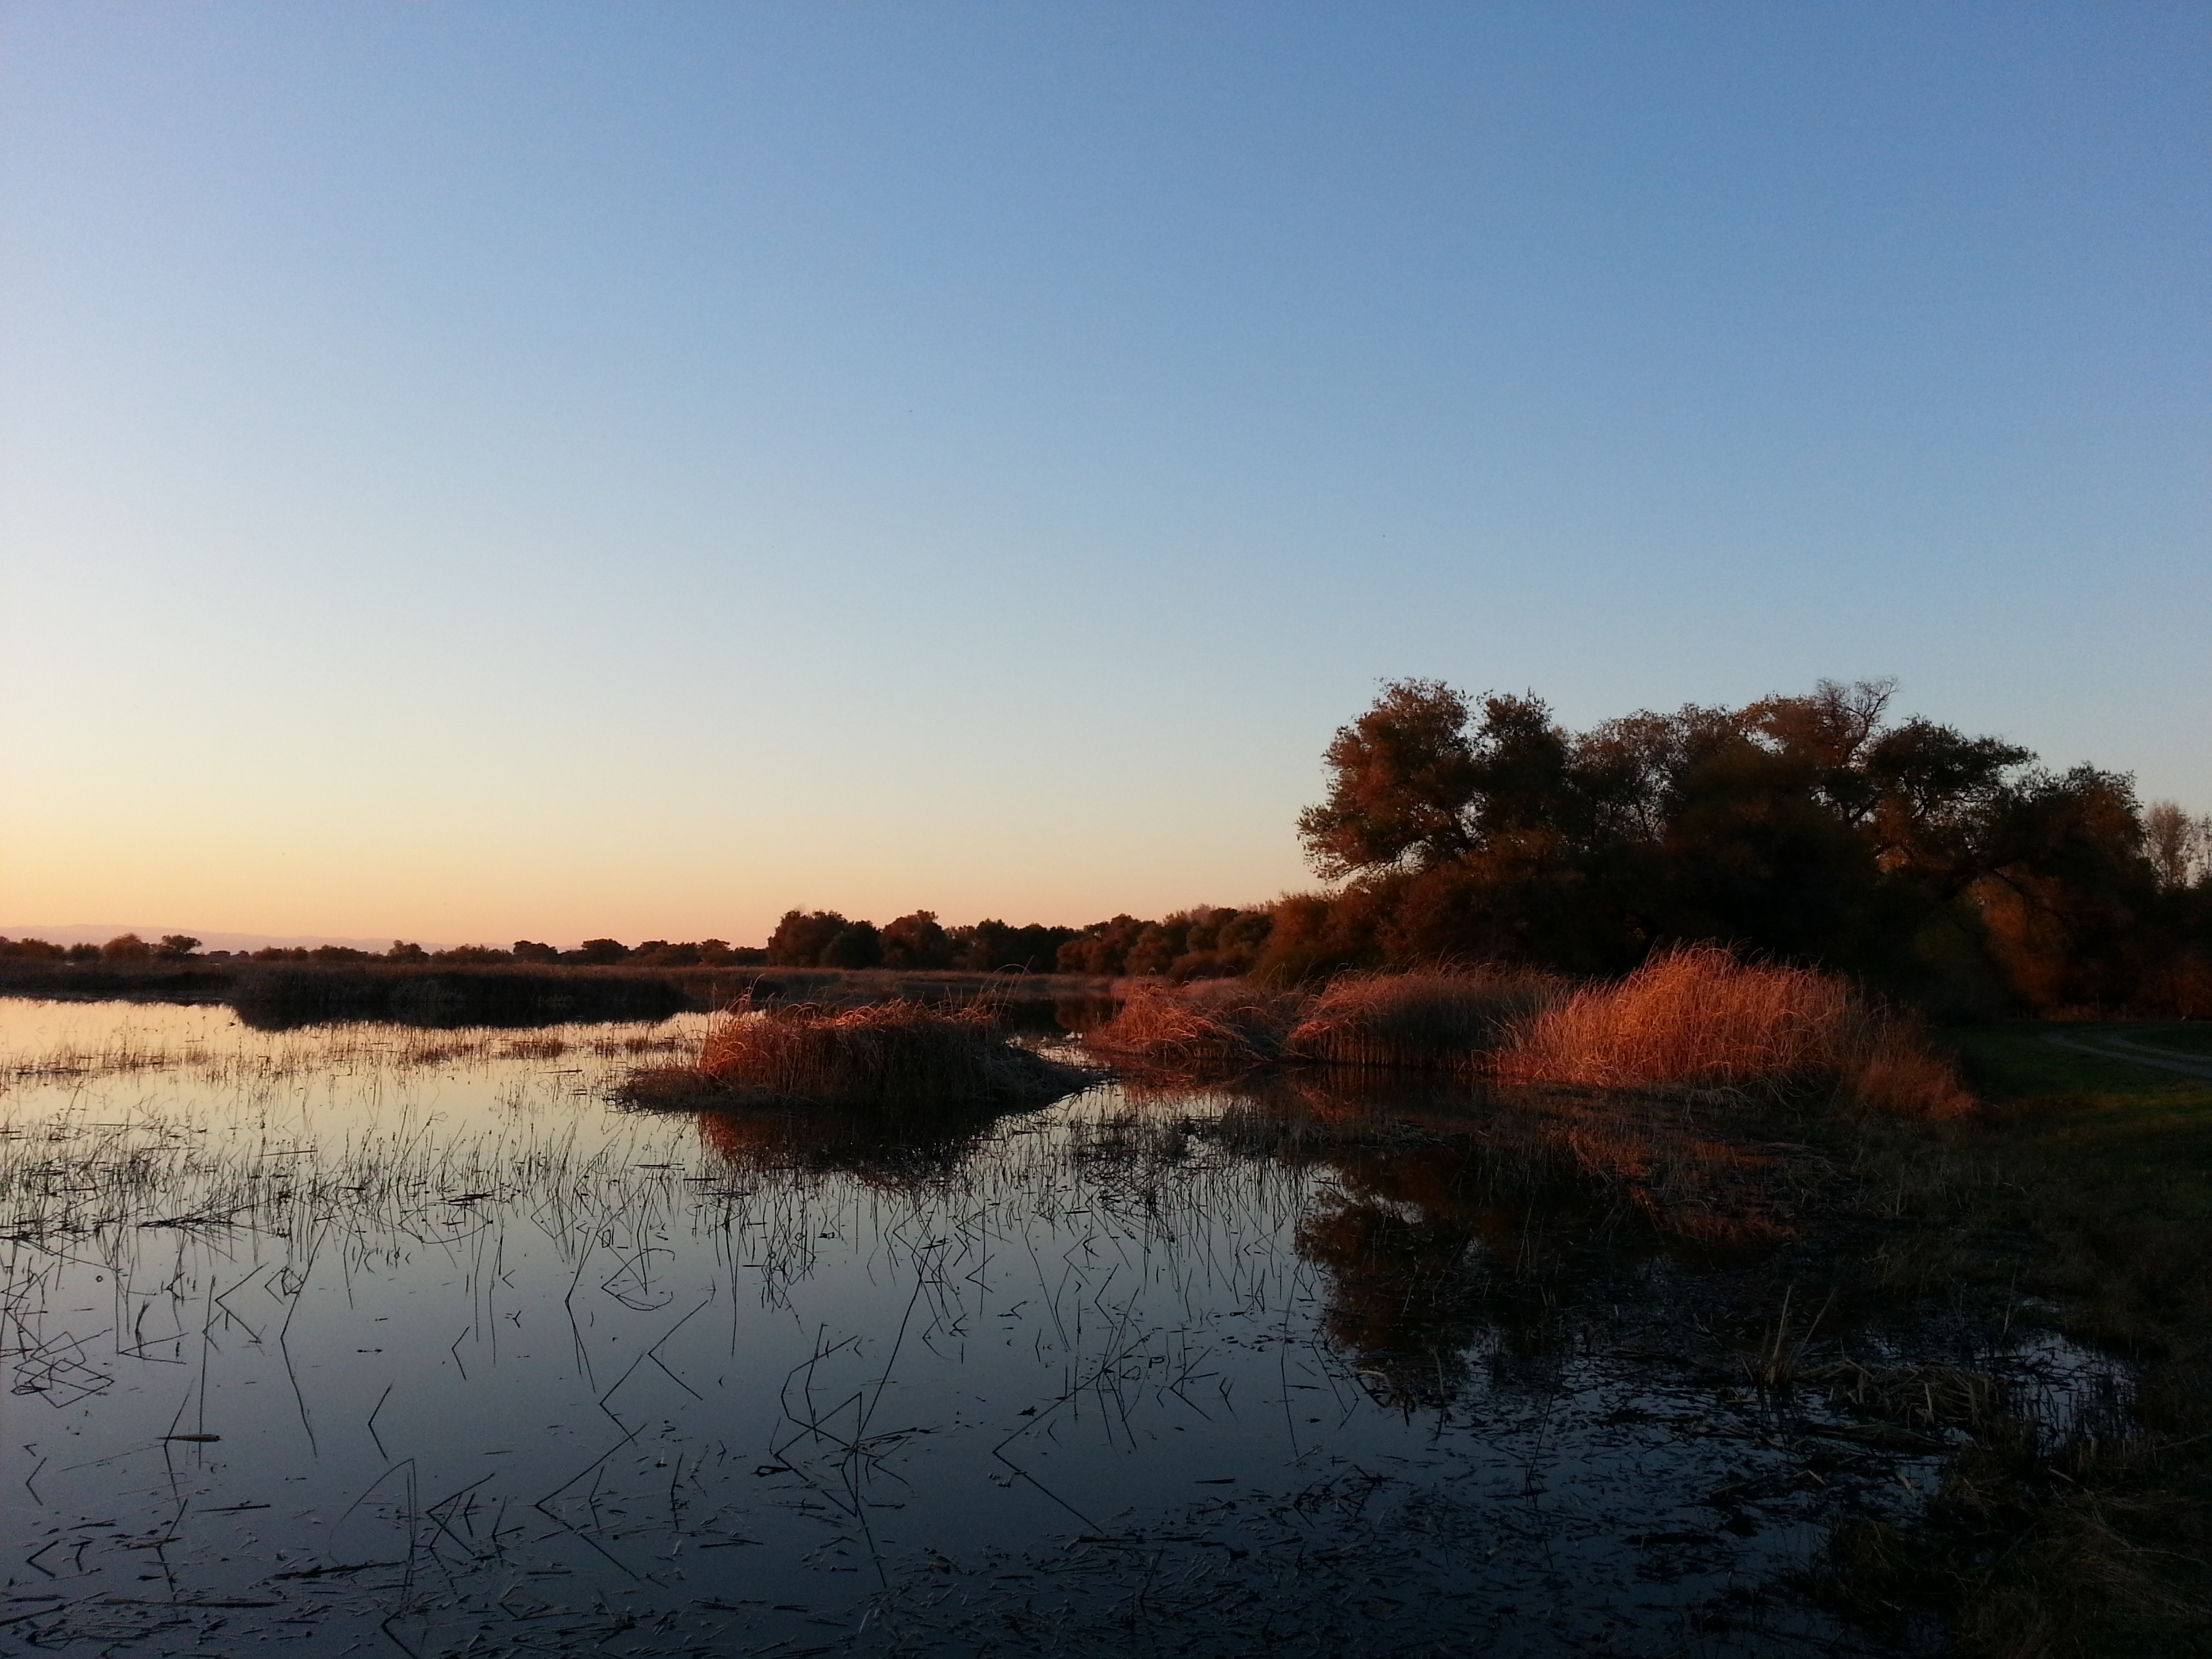 A wetland reflects the blue sky with the sun setting off picture. Trees and shrubs glow in the warm light.